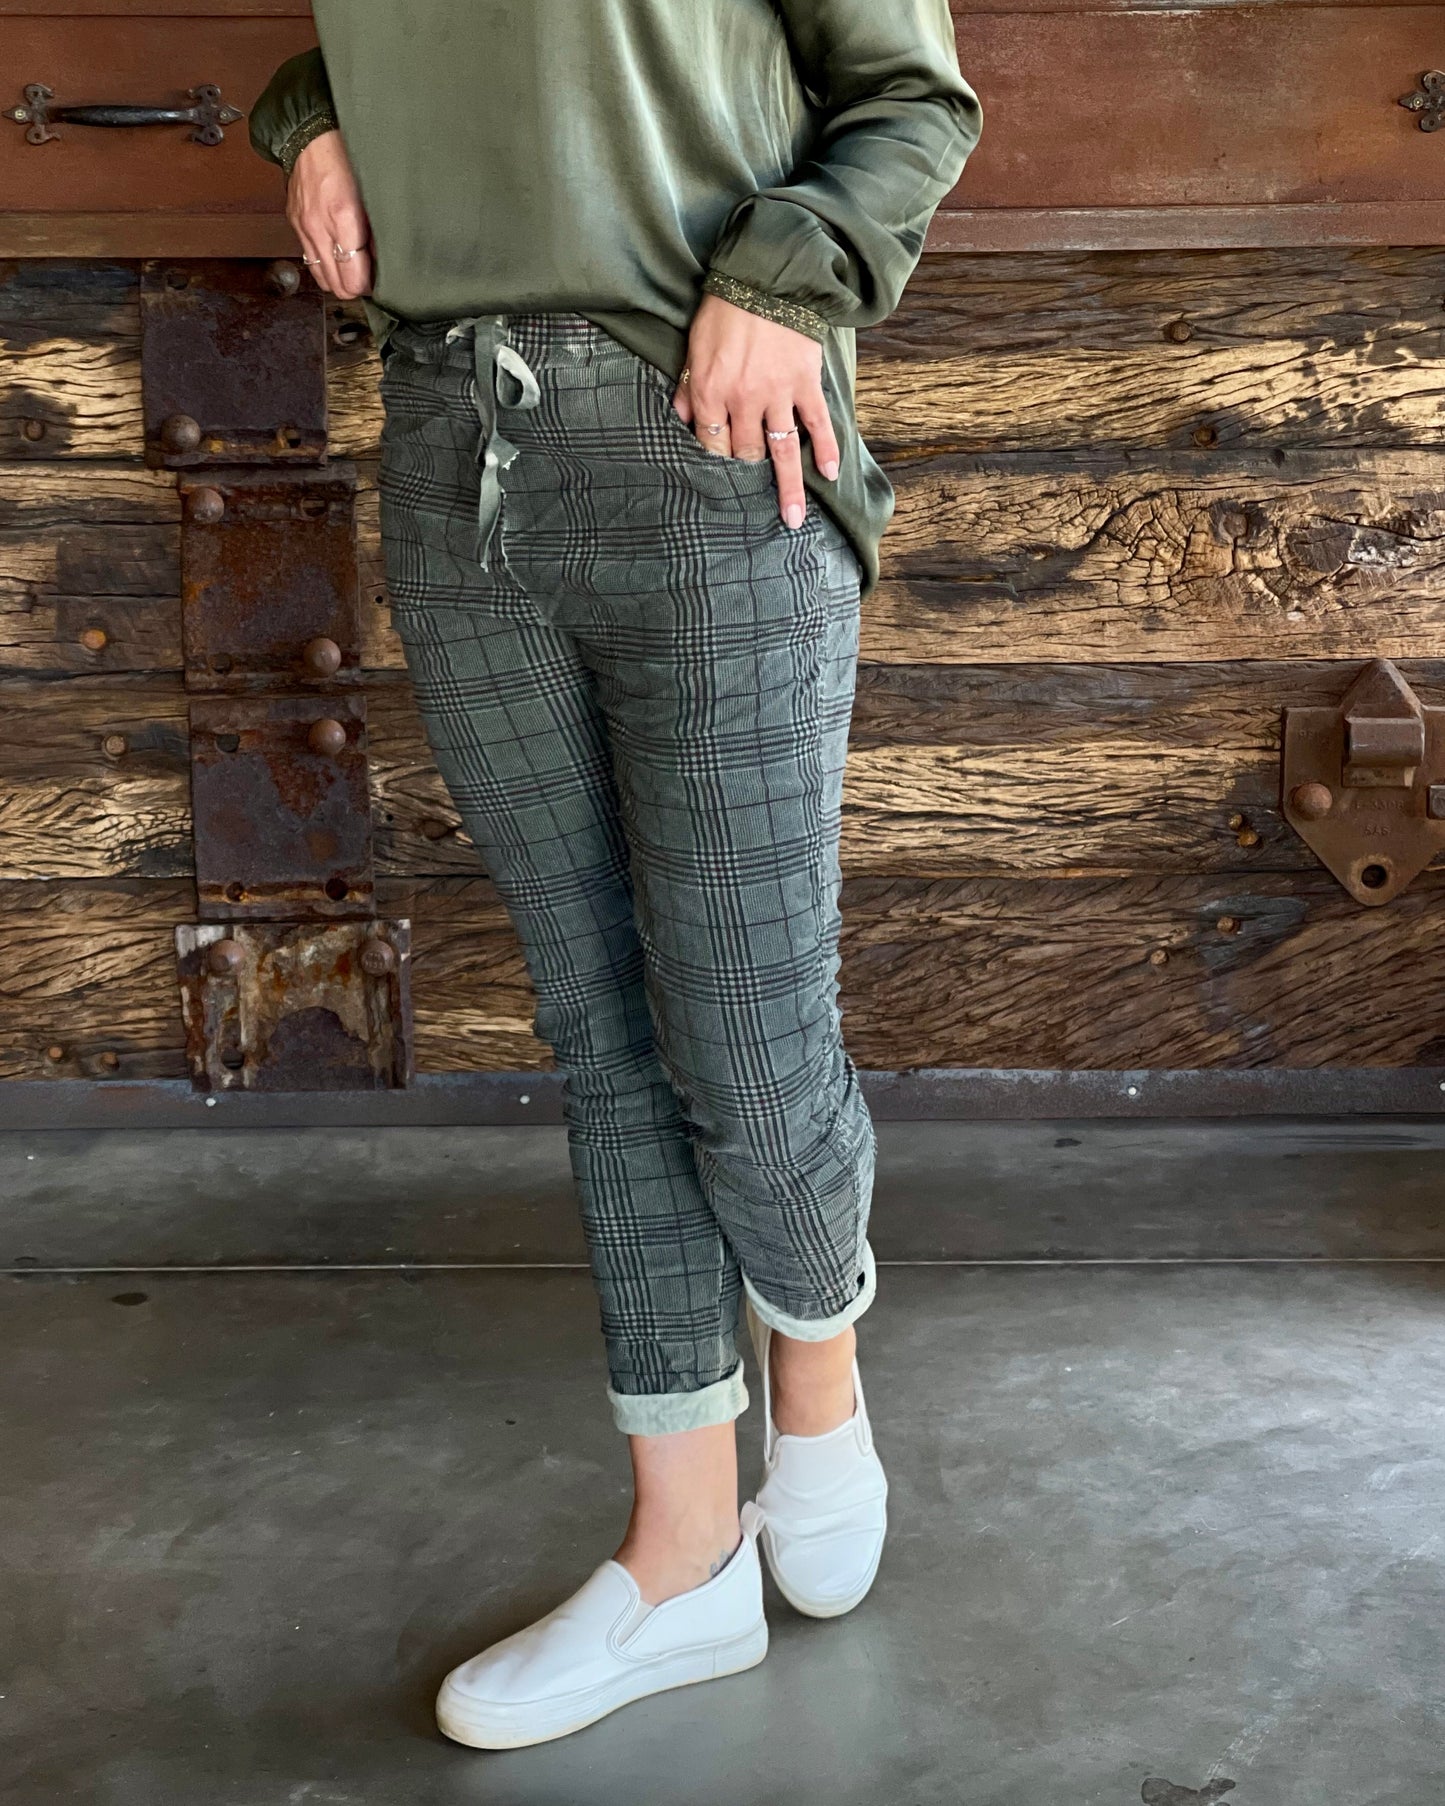 Back by popular demand! These warmer drawstrings pants are perfect for the coming winter. Suede like feel with a tartan print offer a unique combination of texture and pattern. The    print adds an additional layer of visual interest, with its pattern of intersecting lines